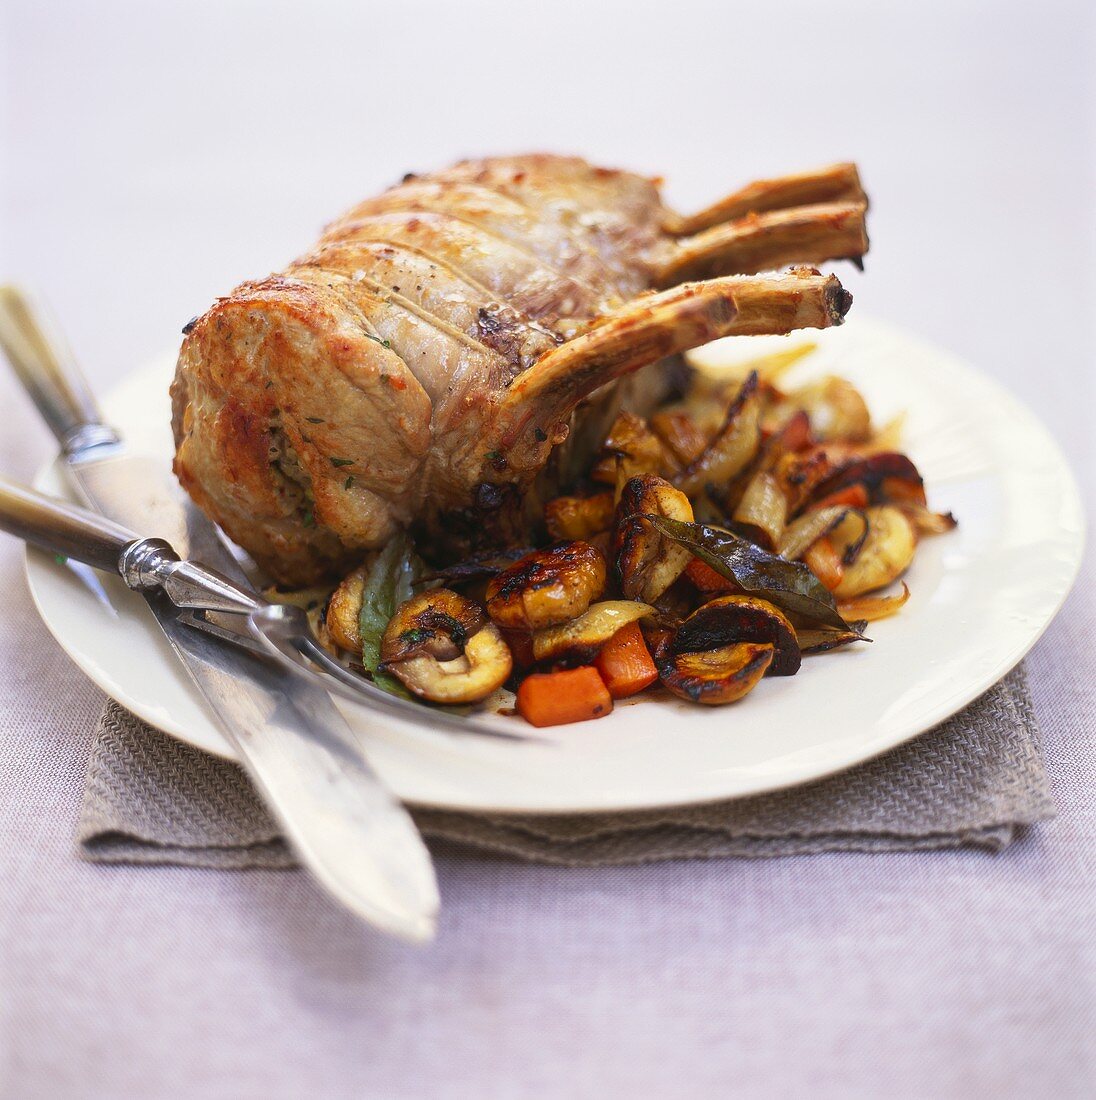 Stuffed roast pork with chestnuts, carrots and bay leaf